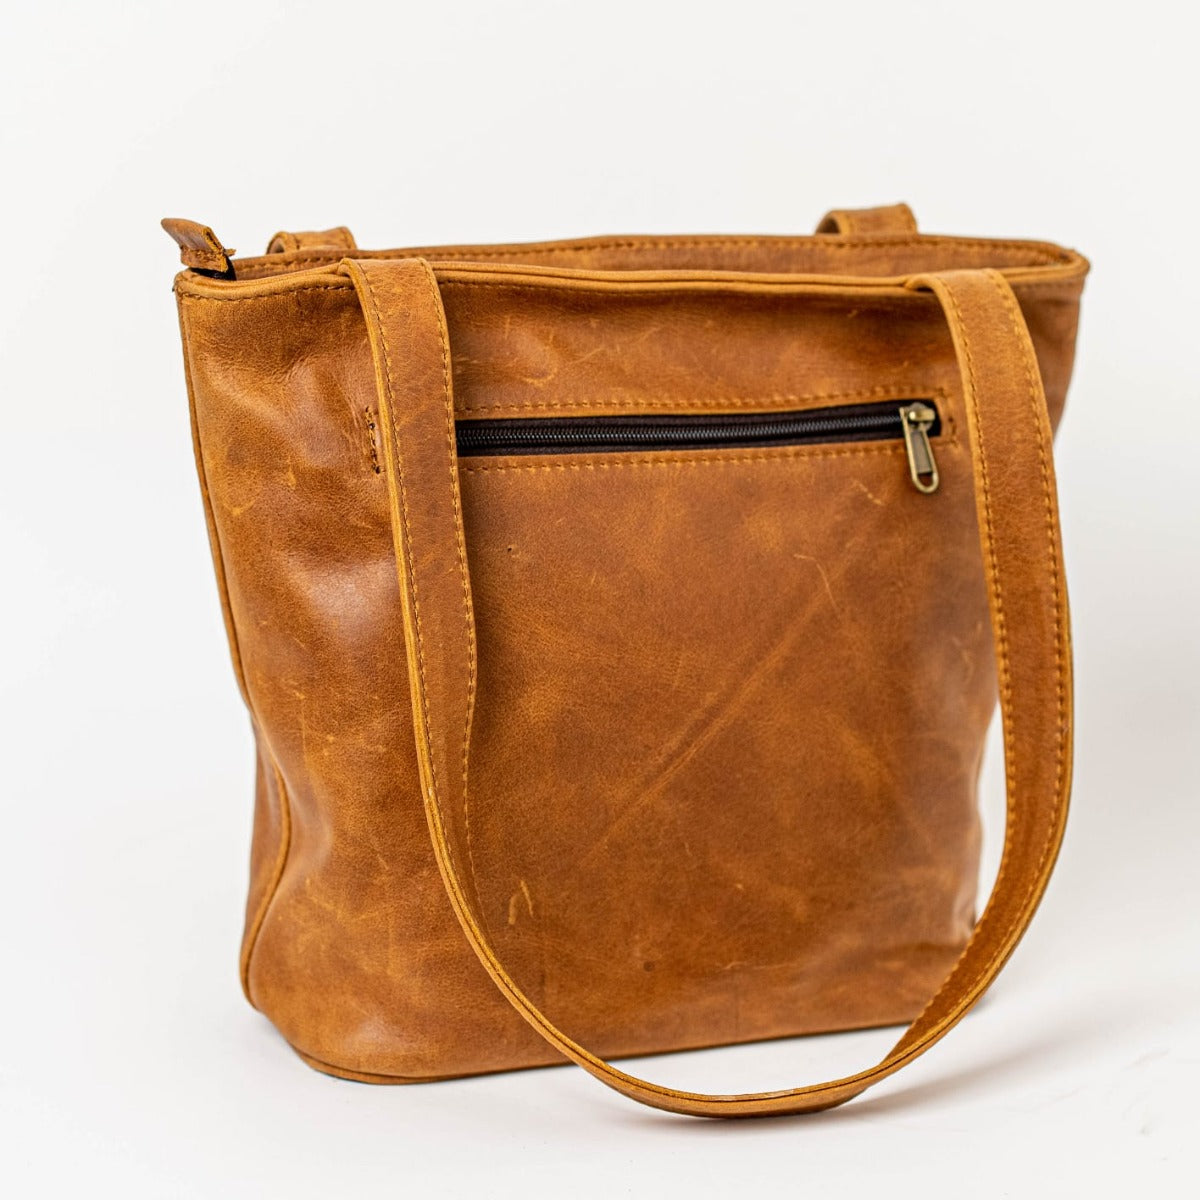 Cm big leather bags in toffee tan colour cape Masai Leather